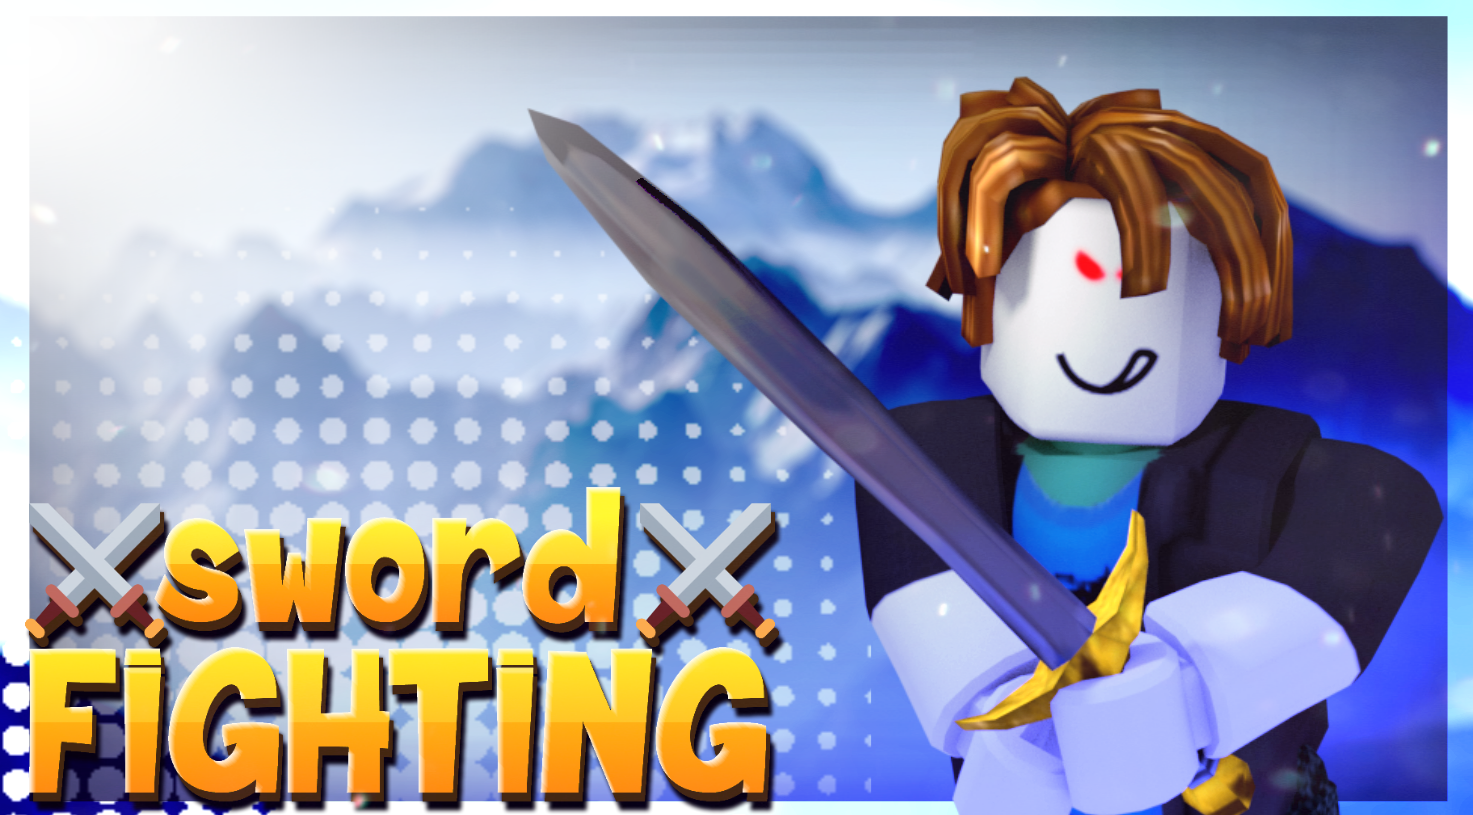 Sword Fighting Roblox Gfx Render By Robloxminis On Deviantart - roblox sword fighting thumbnail